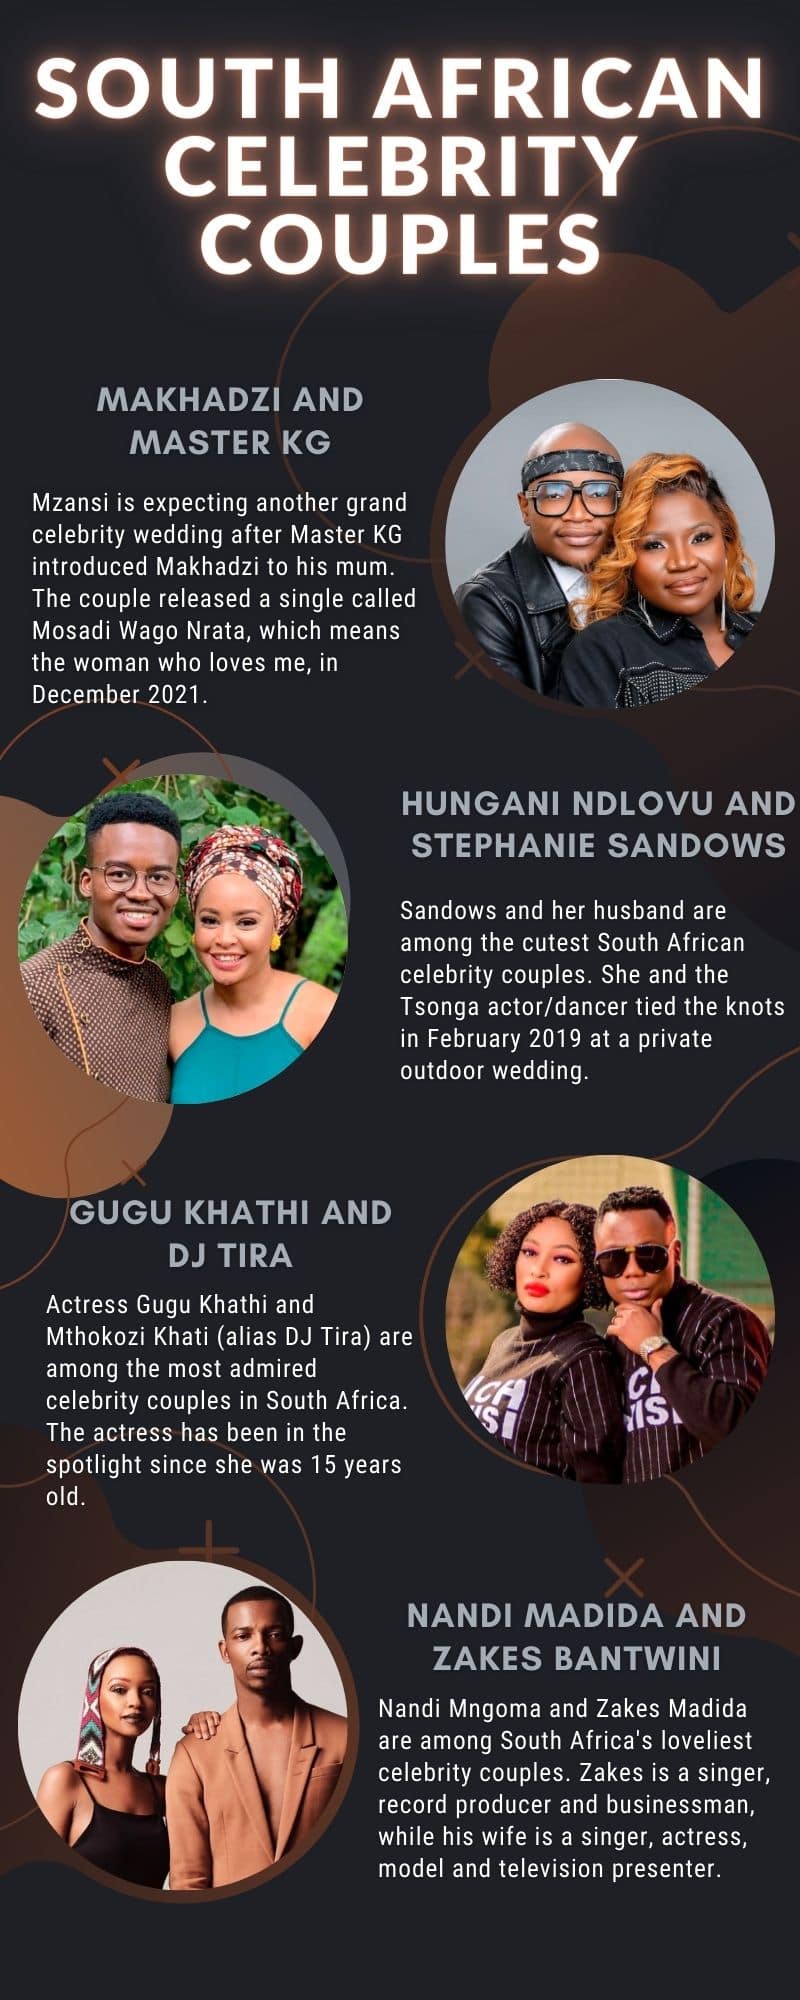 South African celebrity couples